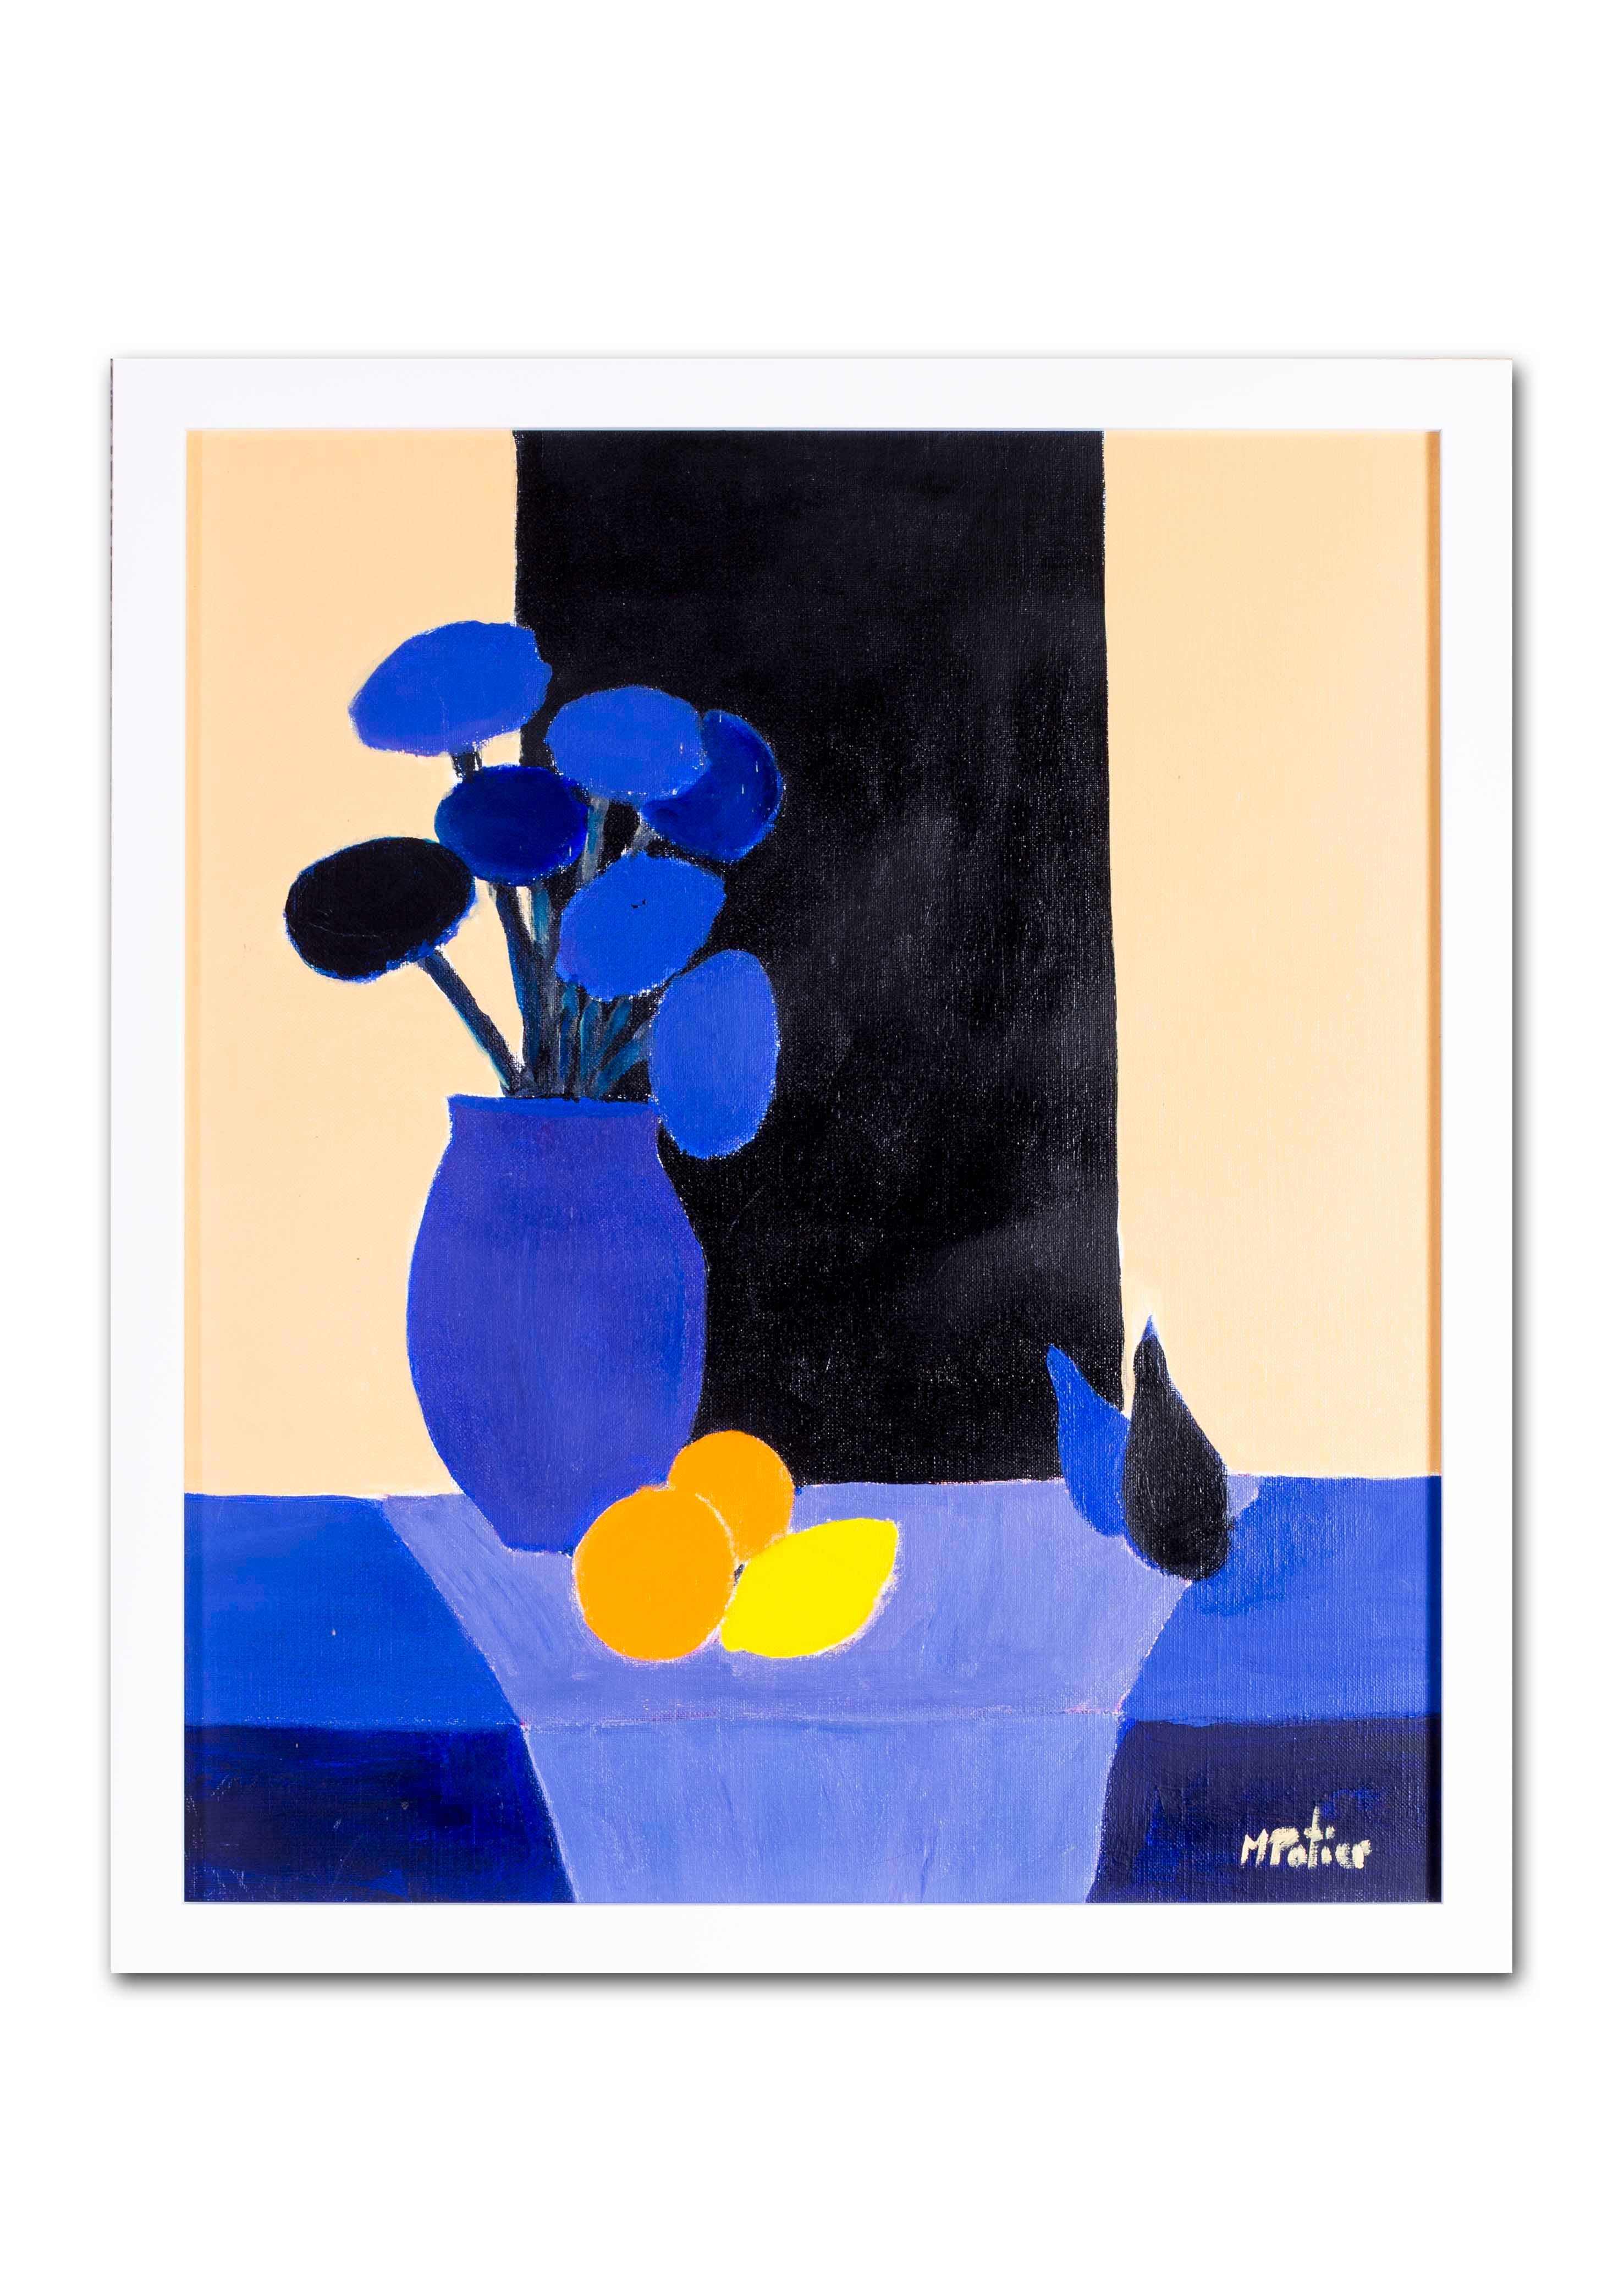 Maurice Potier (French, 1926 – 2002)
Vase bleu et fruits (Blue vase and fruits)
Oil on canvas
Signed ‘M Potier’ (lower right)
27.1/2 x 23.5/8 in. (70 x 60 cm.)
